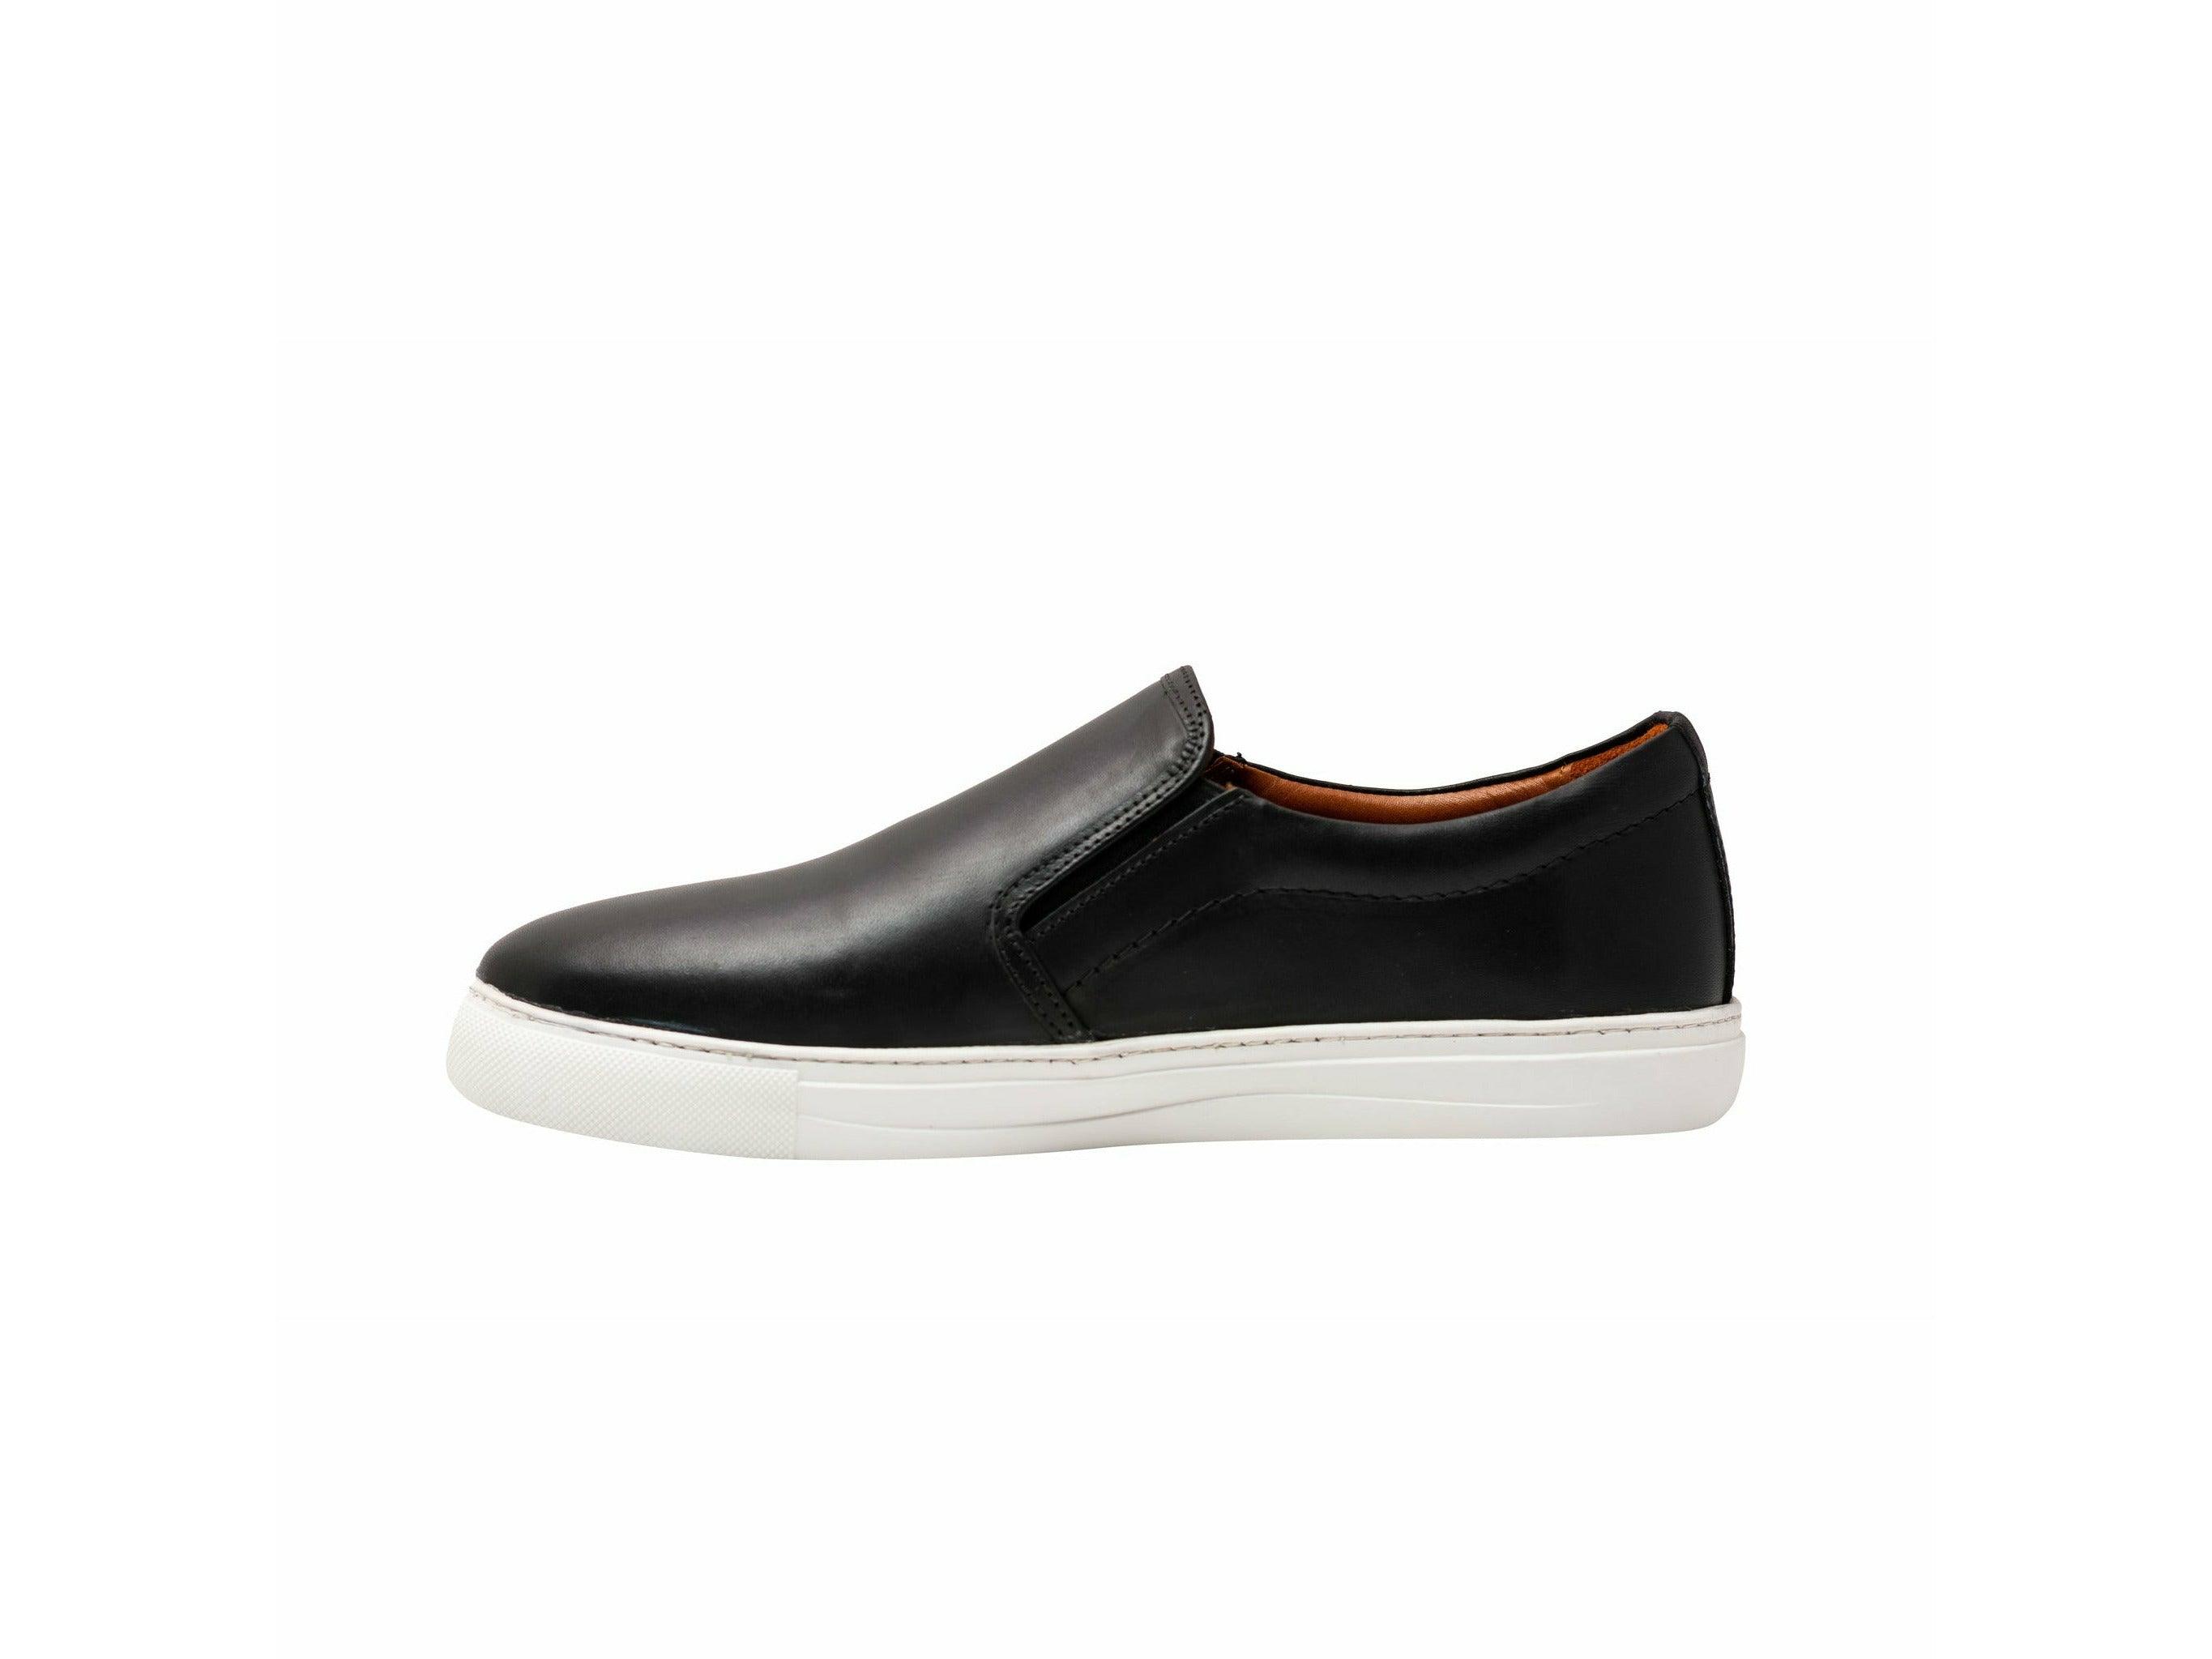 Noma - Midnight with White Sole – Mohrasneakers